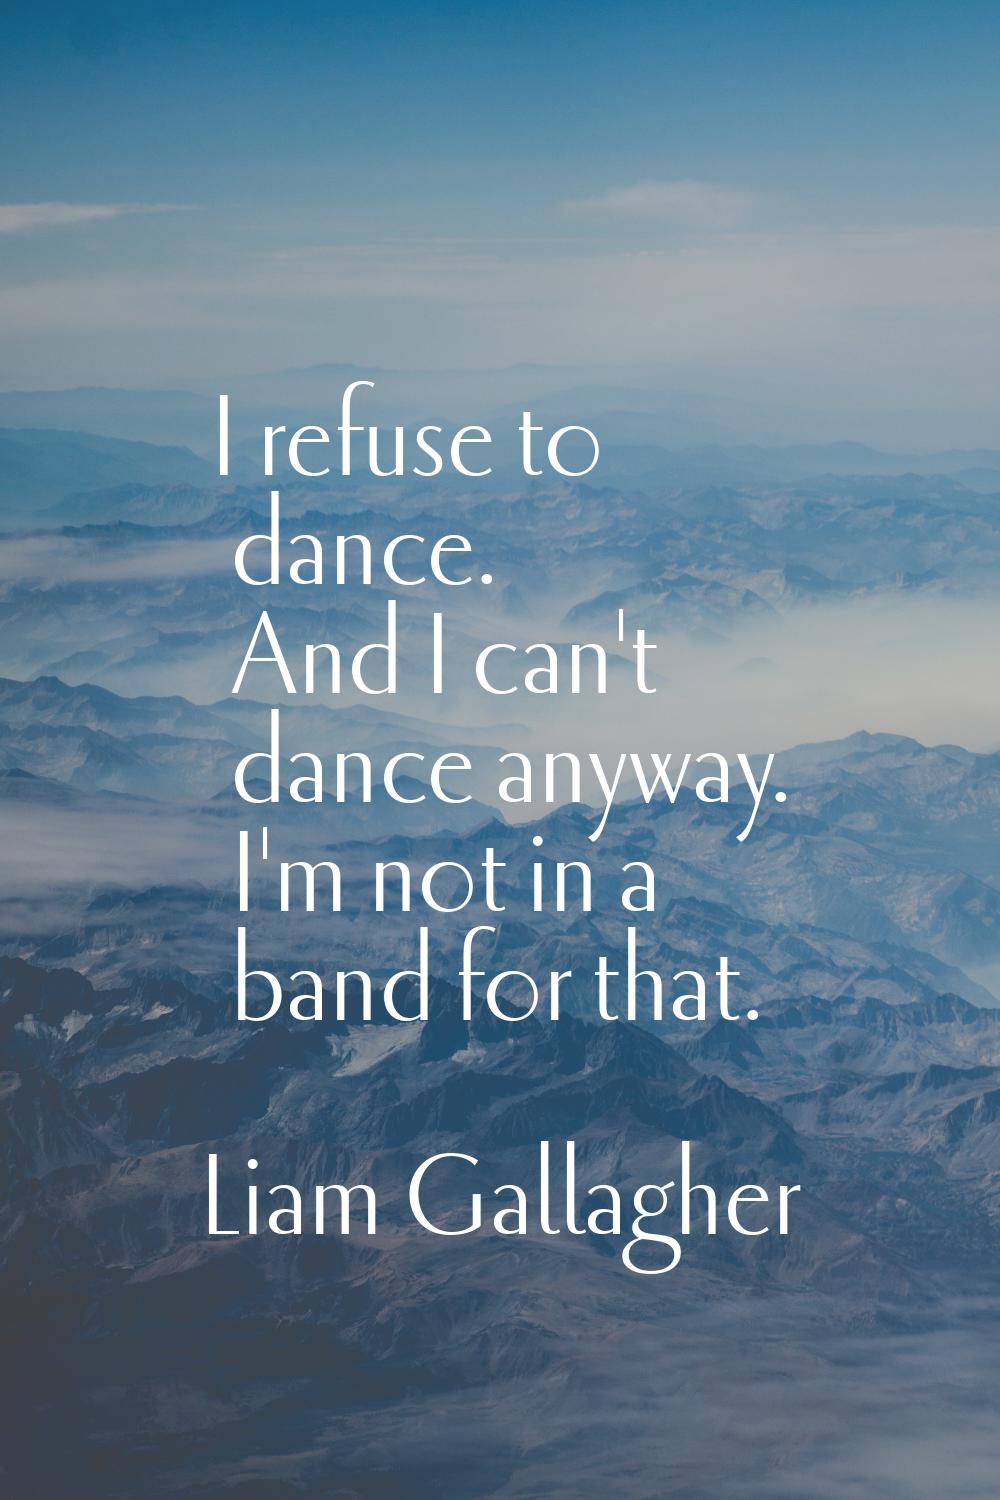 I refuse to dance. And I can't dance anyway. I'm not in a band for that.